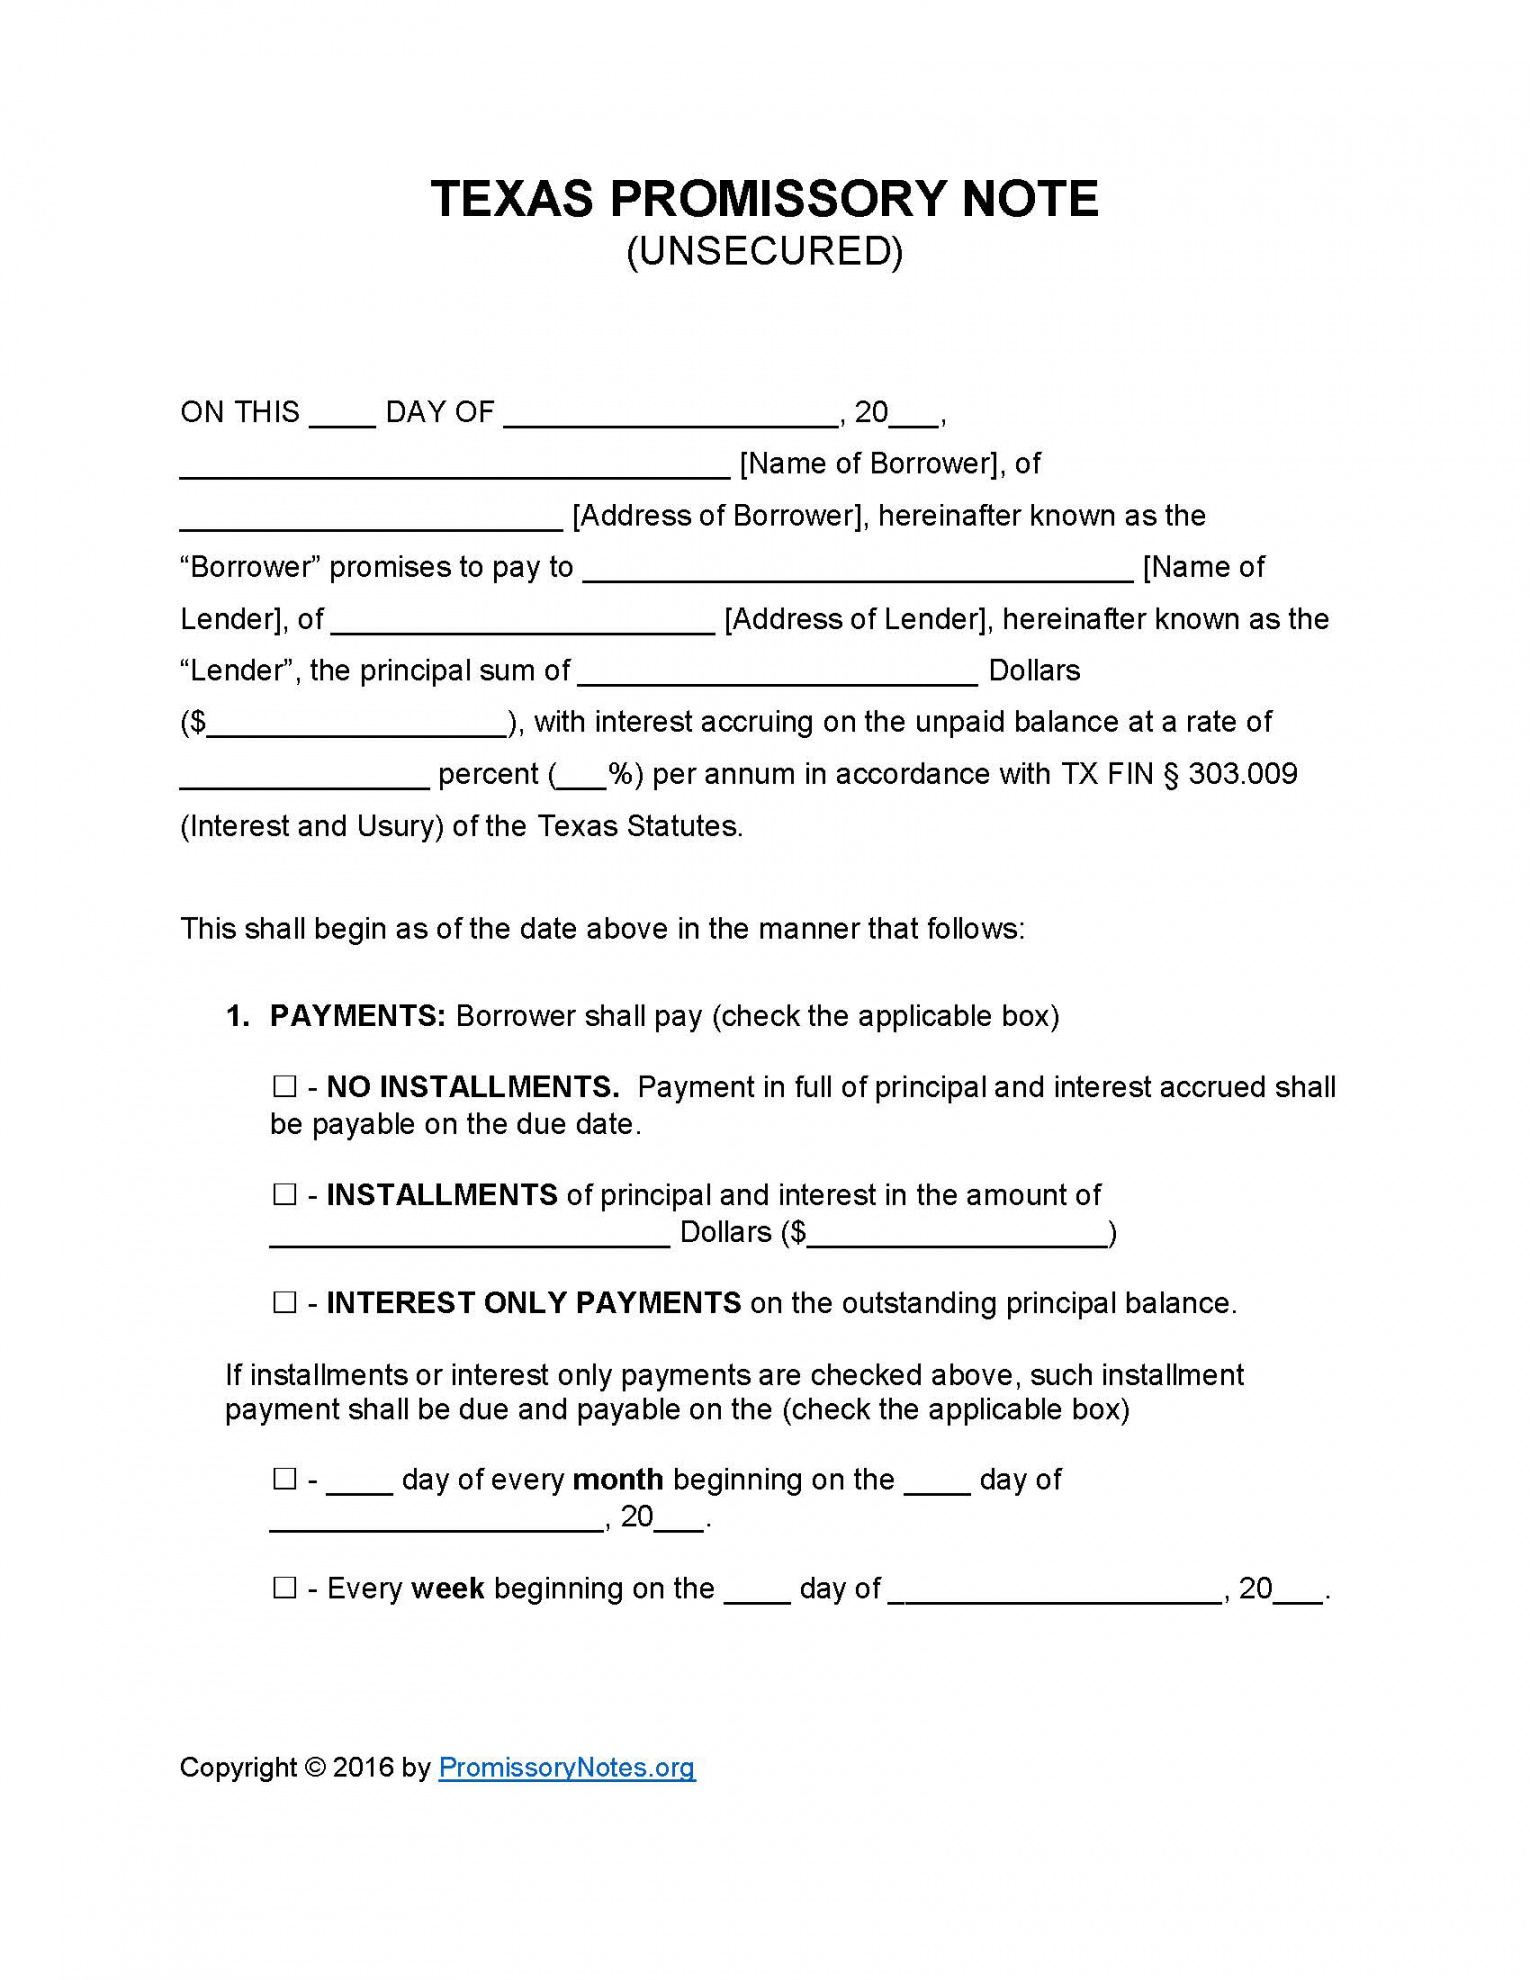 printable texas unsecured promissory note template  promissory notes texas promissory note template example